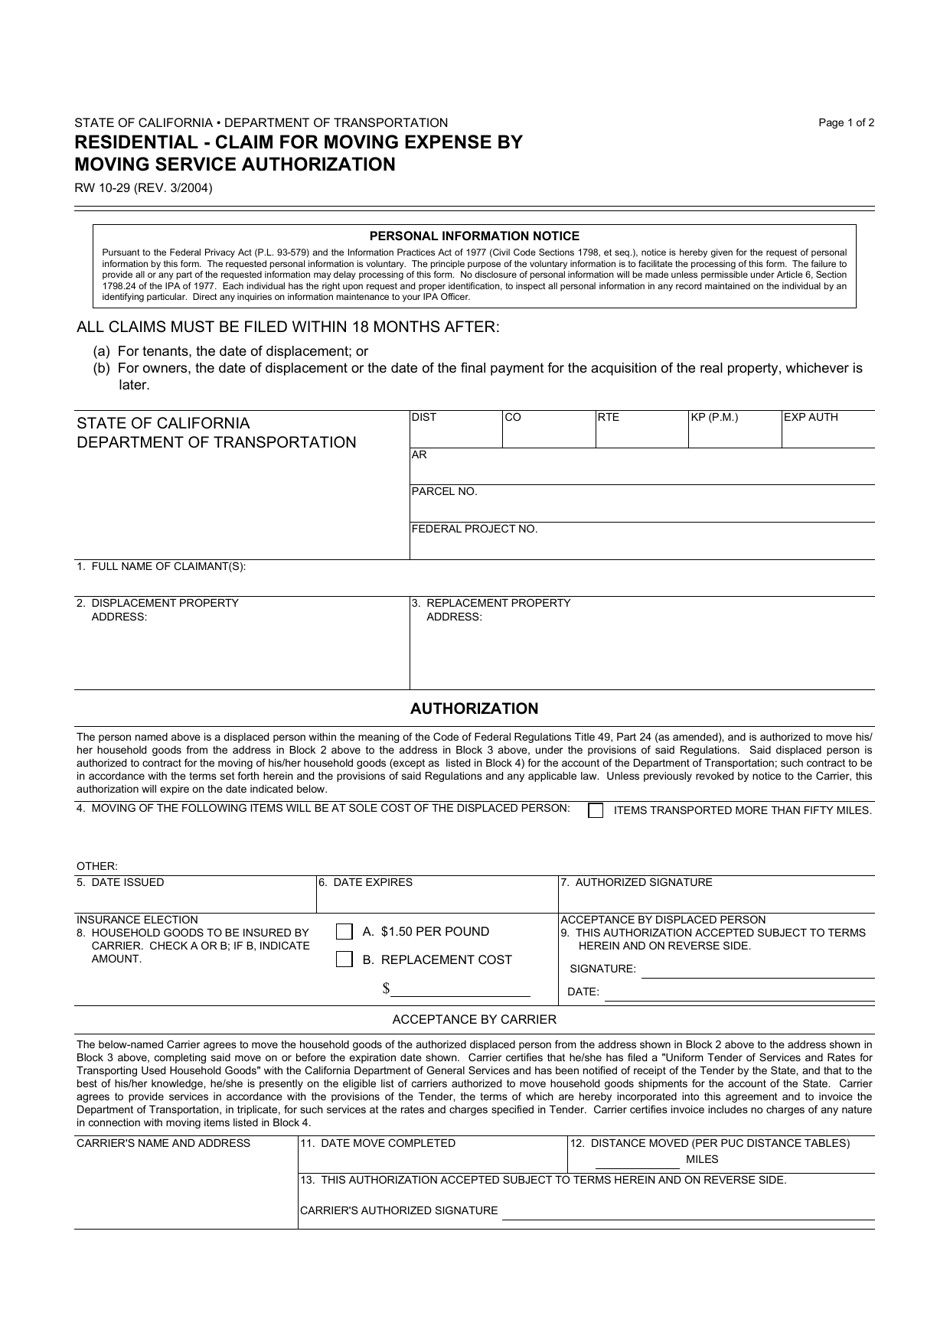 Form RW10-29 Residential - Claim for Moving Expense by Moving Service Authorization - California, Page 1